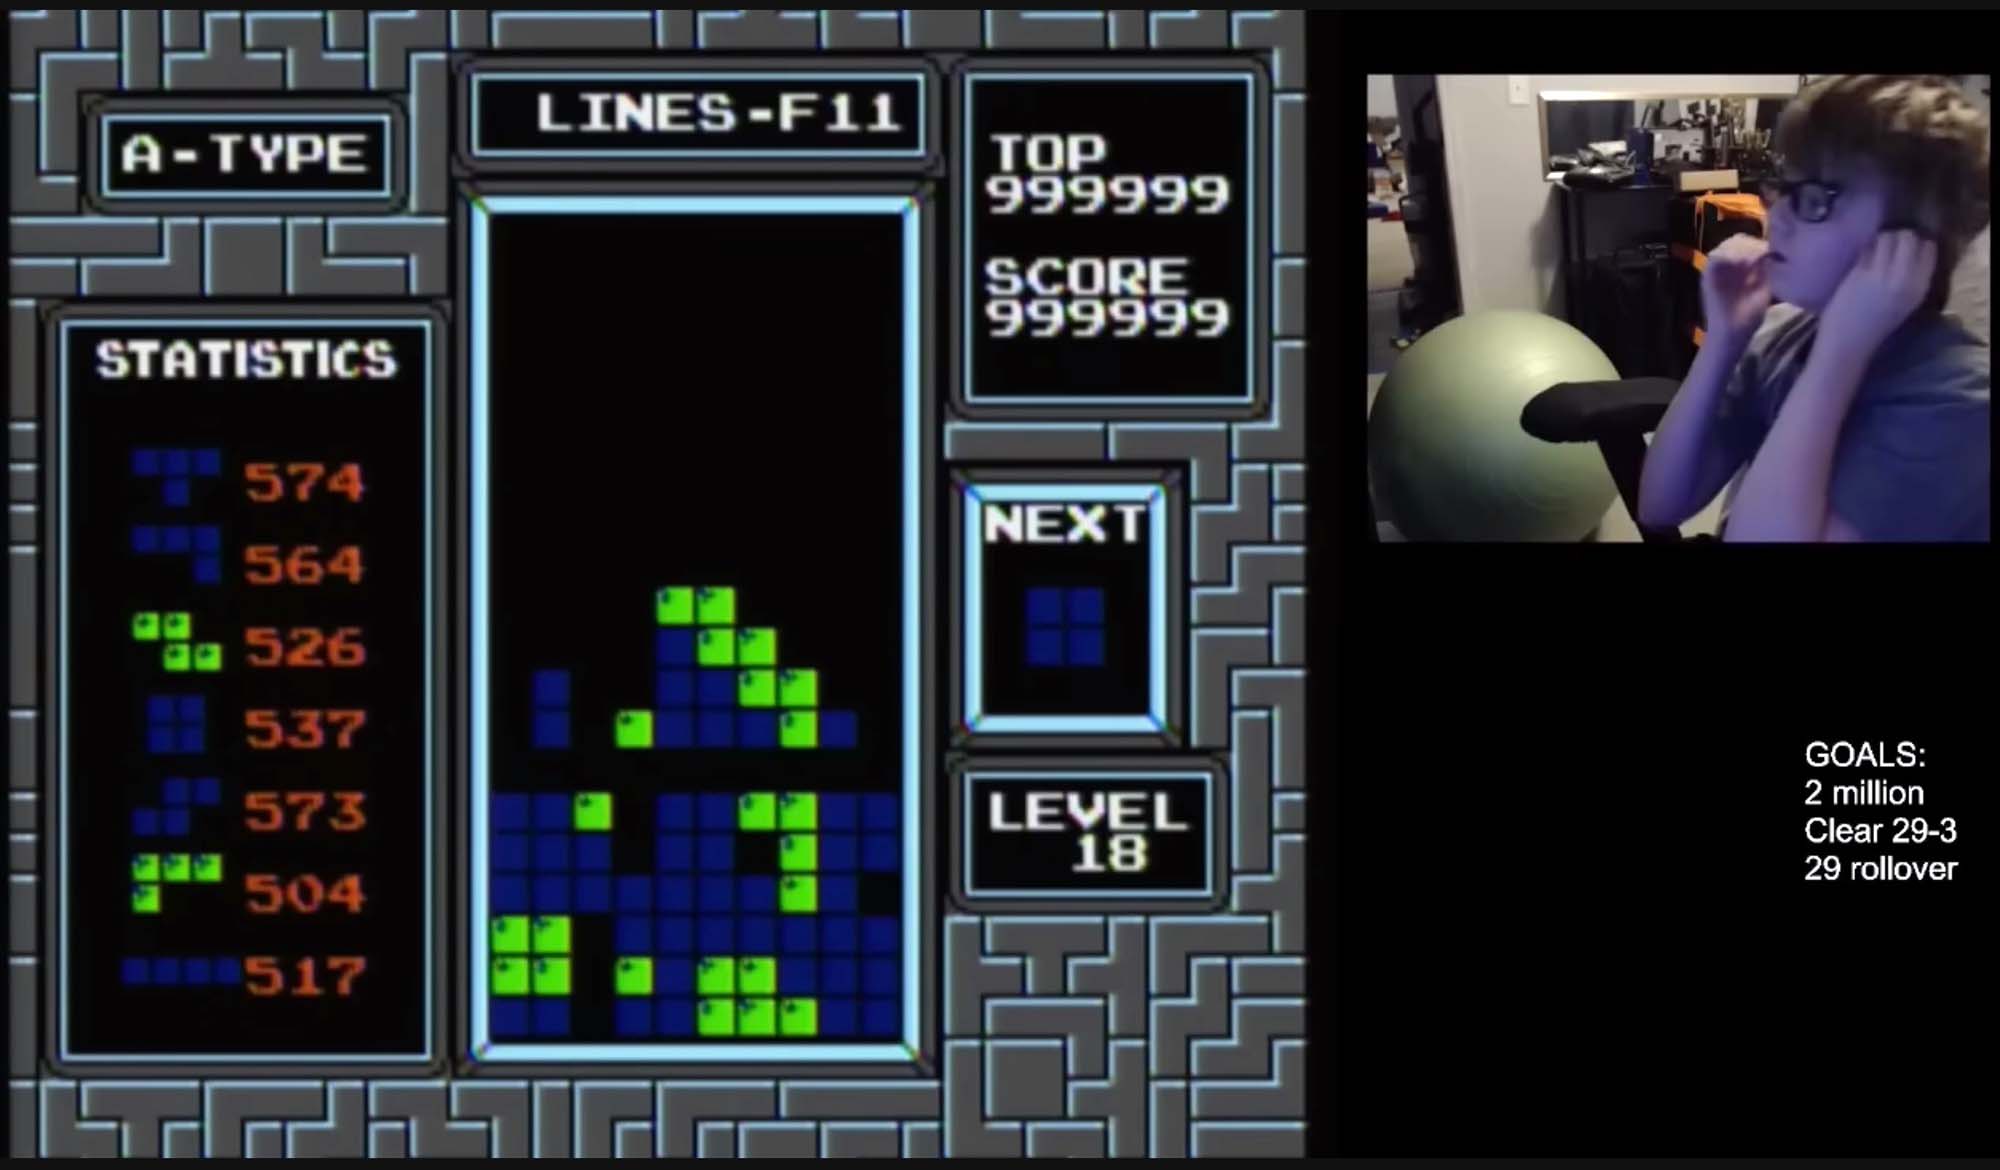 After Nearly 35 Years, Tetris Finally Meets Its Match: Using Lightning-Quick Reflexes, A Teenager Beat Tetris And Managed To Finally Conquer The Classic Block-Stacking Puzzle Game Nearly 35 Years After Its Creation.